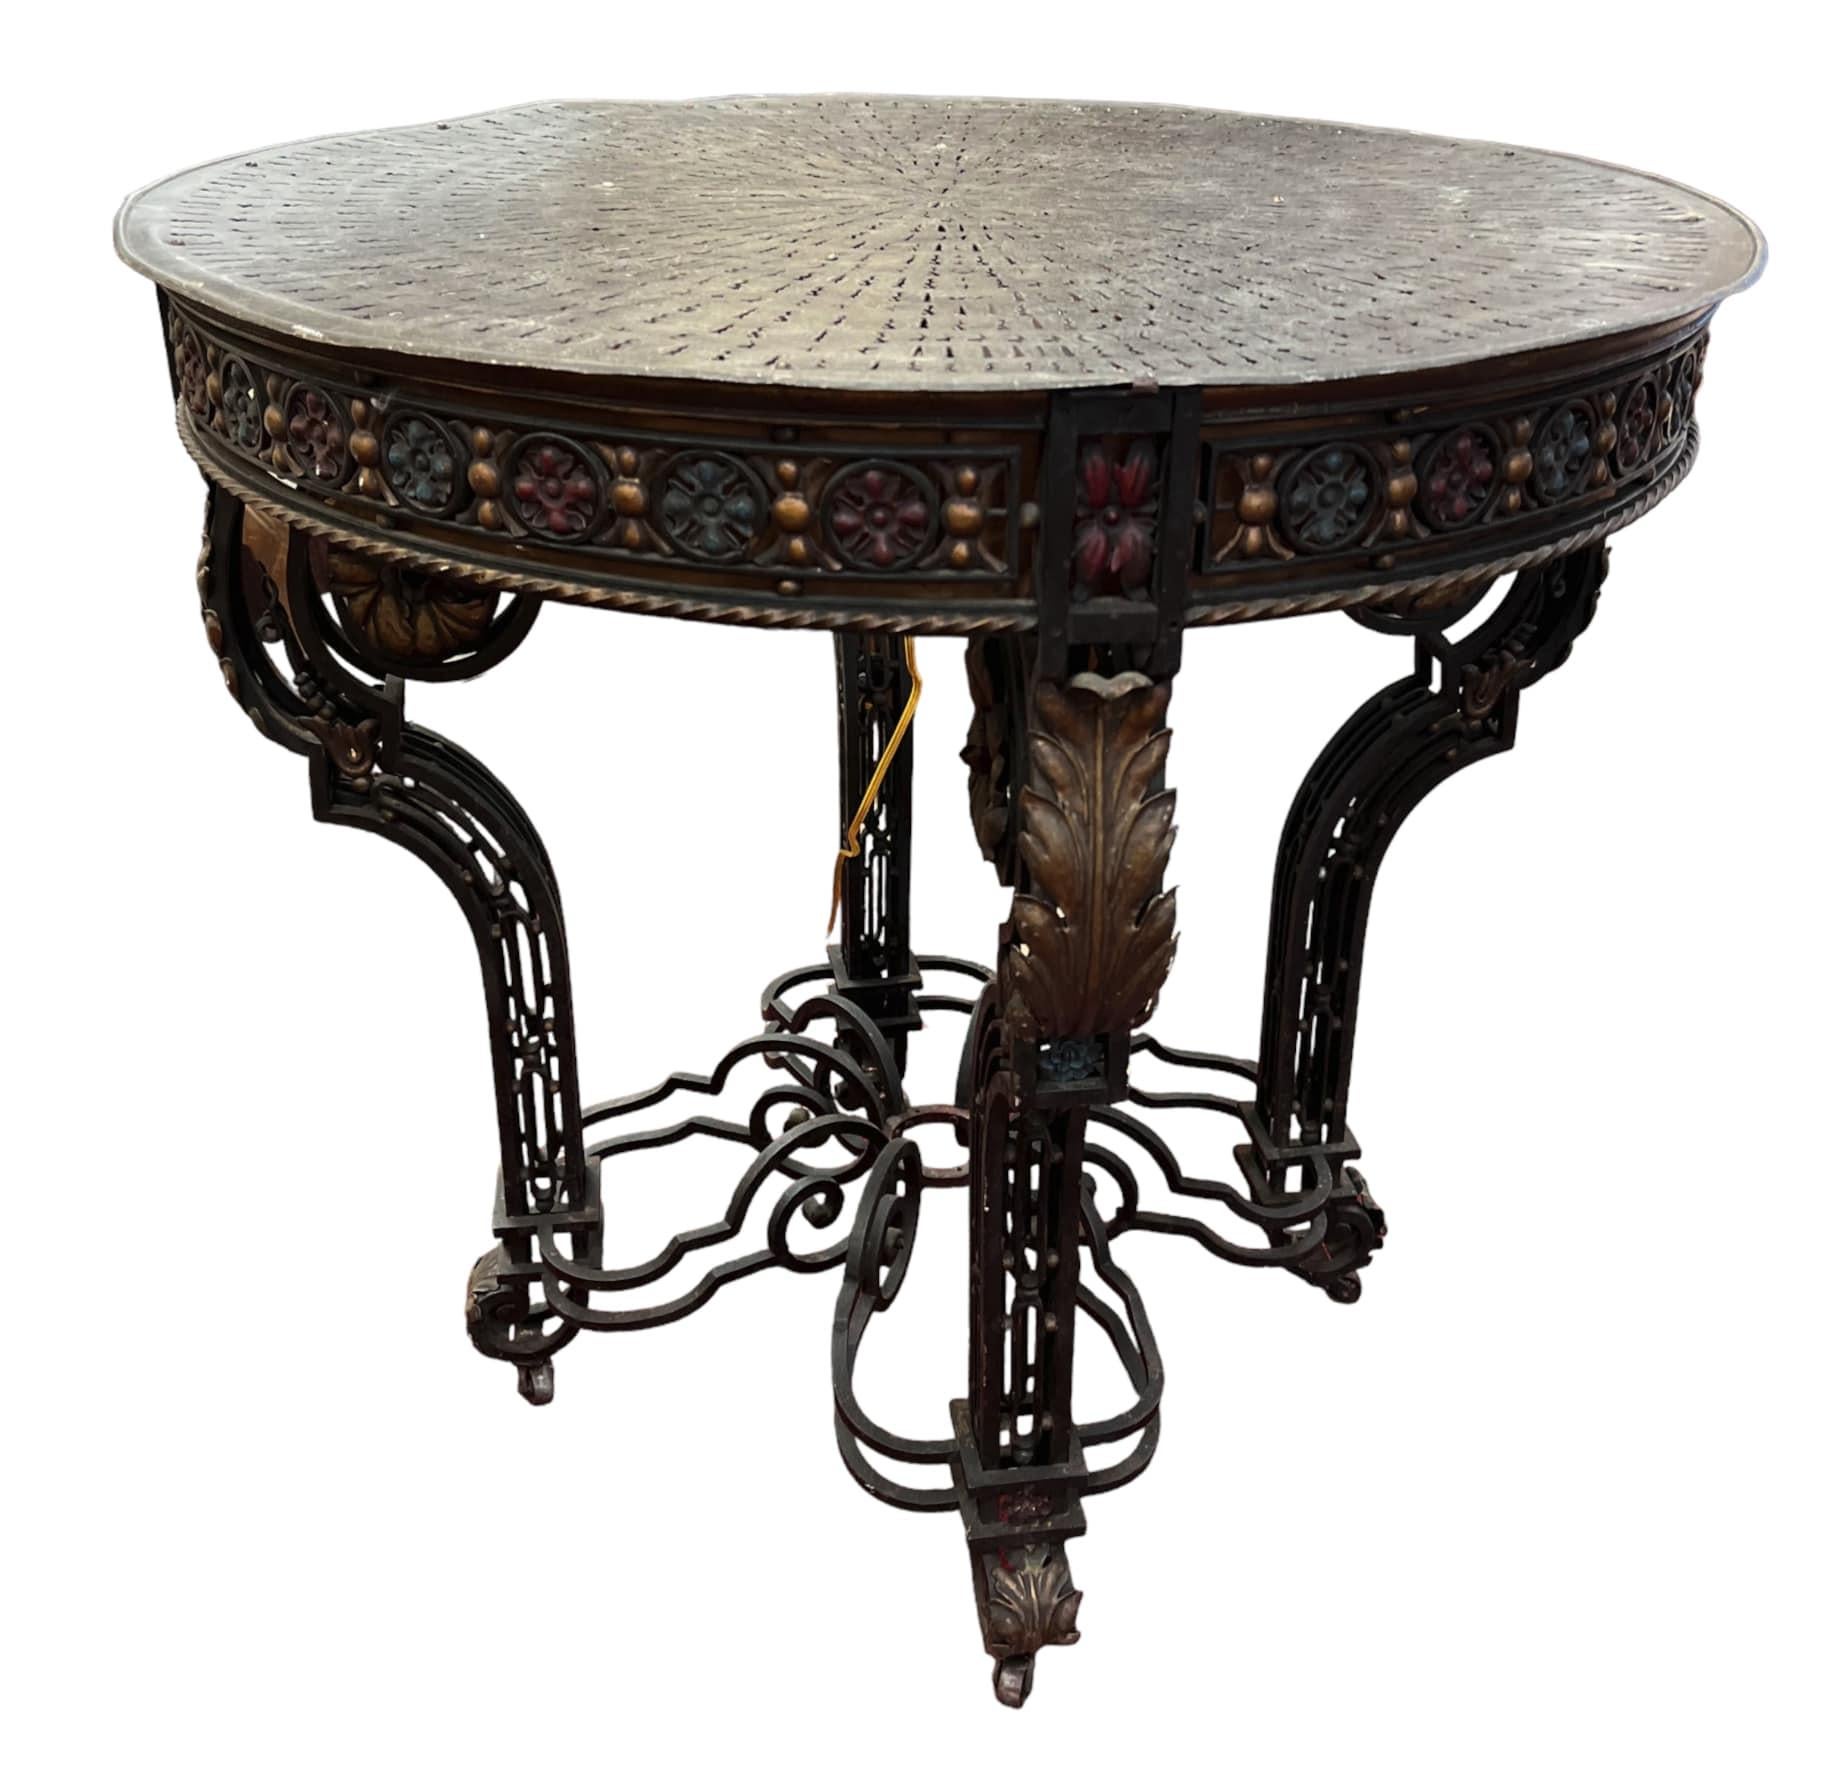 Handcrafted circa 1875 by a metal artist schooled in Europe, the antique round wrought iron table features a built-in light fixture (110 V), added at a later point, which makes this table incredibly unique. The 32